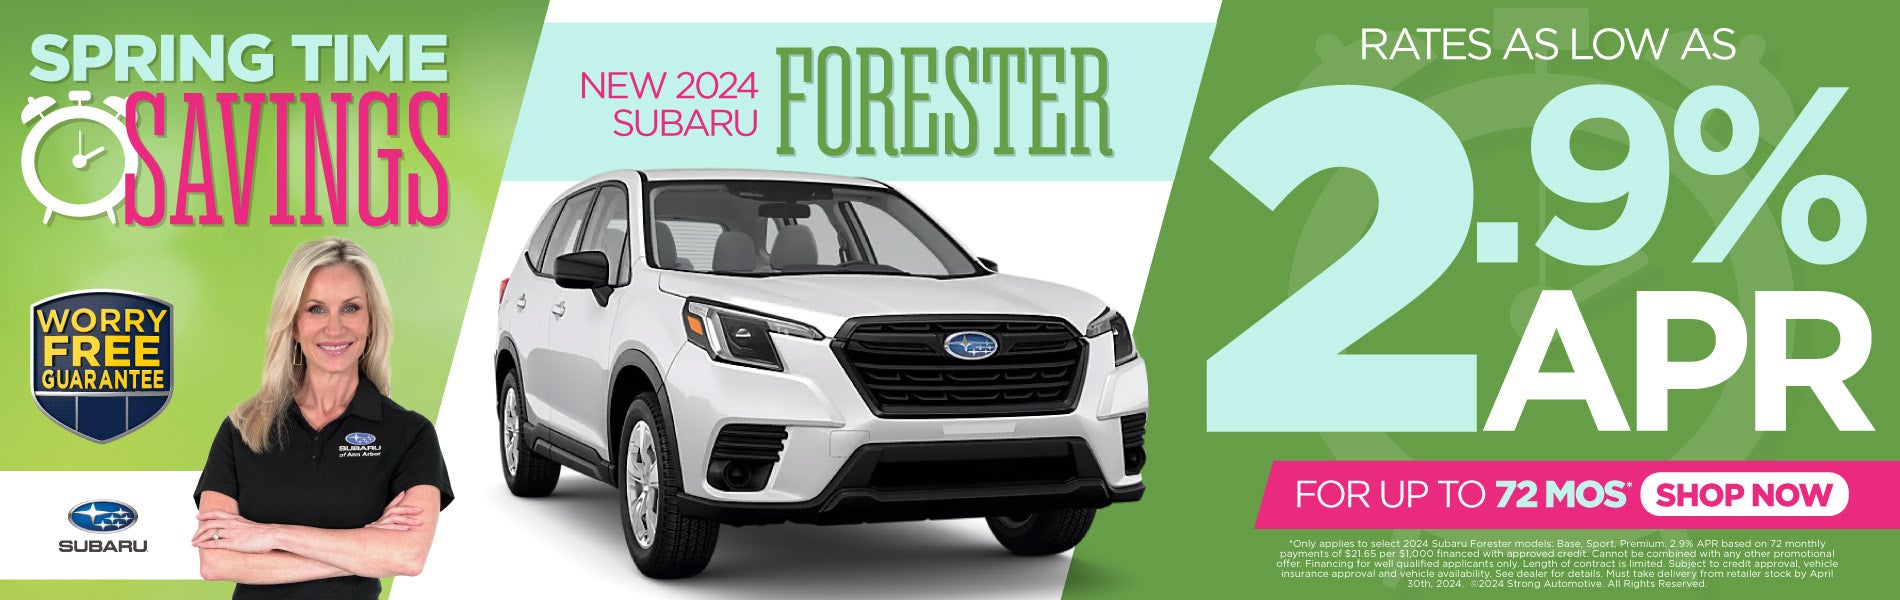 New 2024 Subaru Forester rates as low as 2.9%